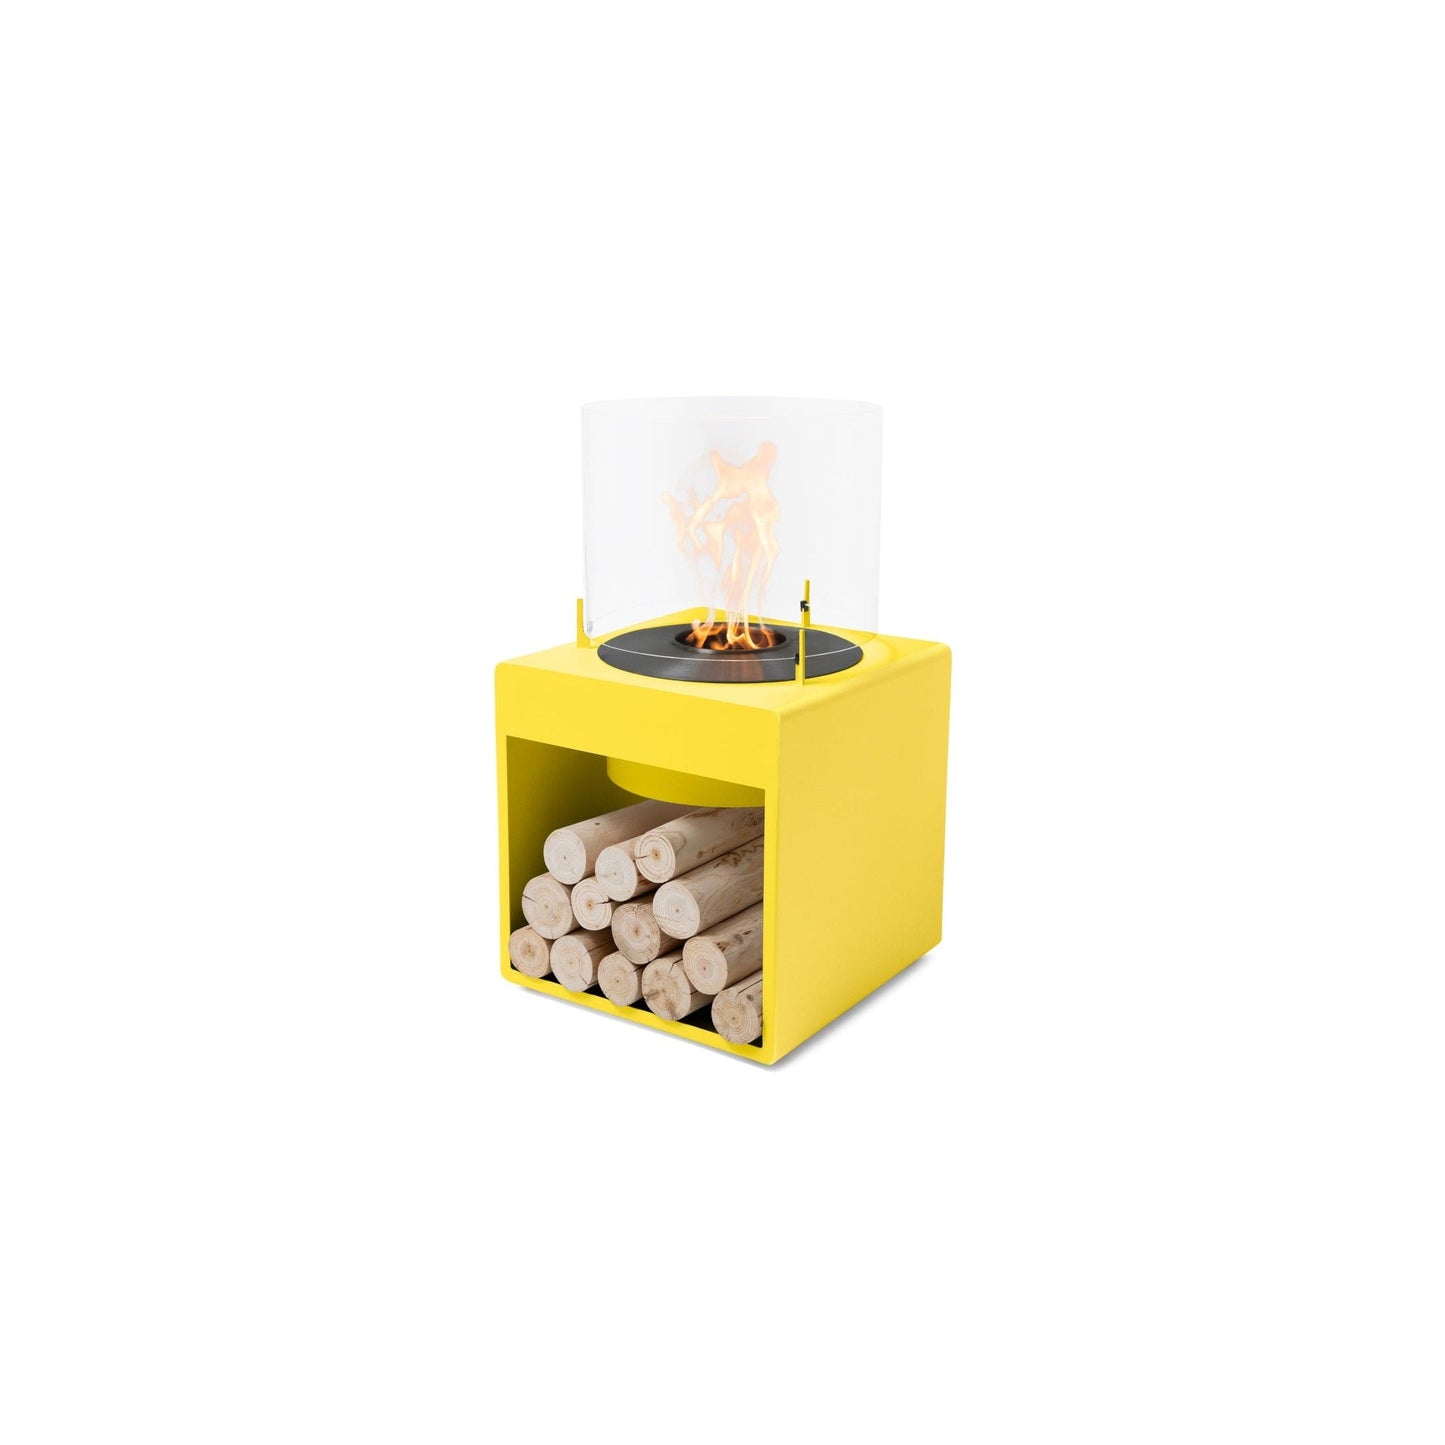 EcoSmart Fire POP 8L 31" Yellow Freestanding Designer Fireplace with Black Burner by MAD Design Group